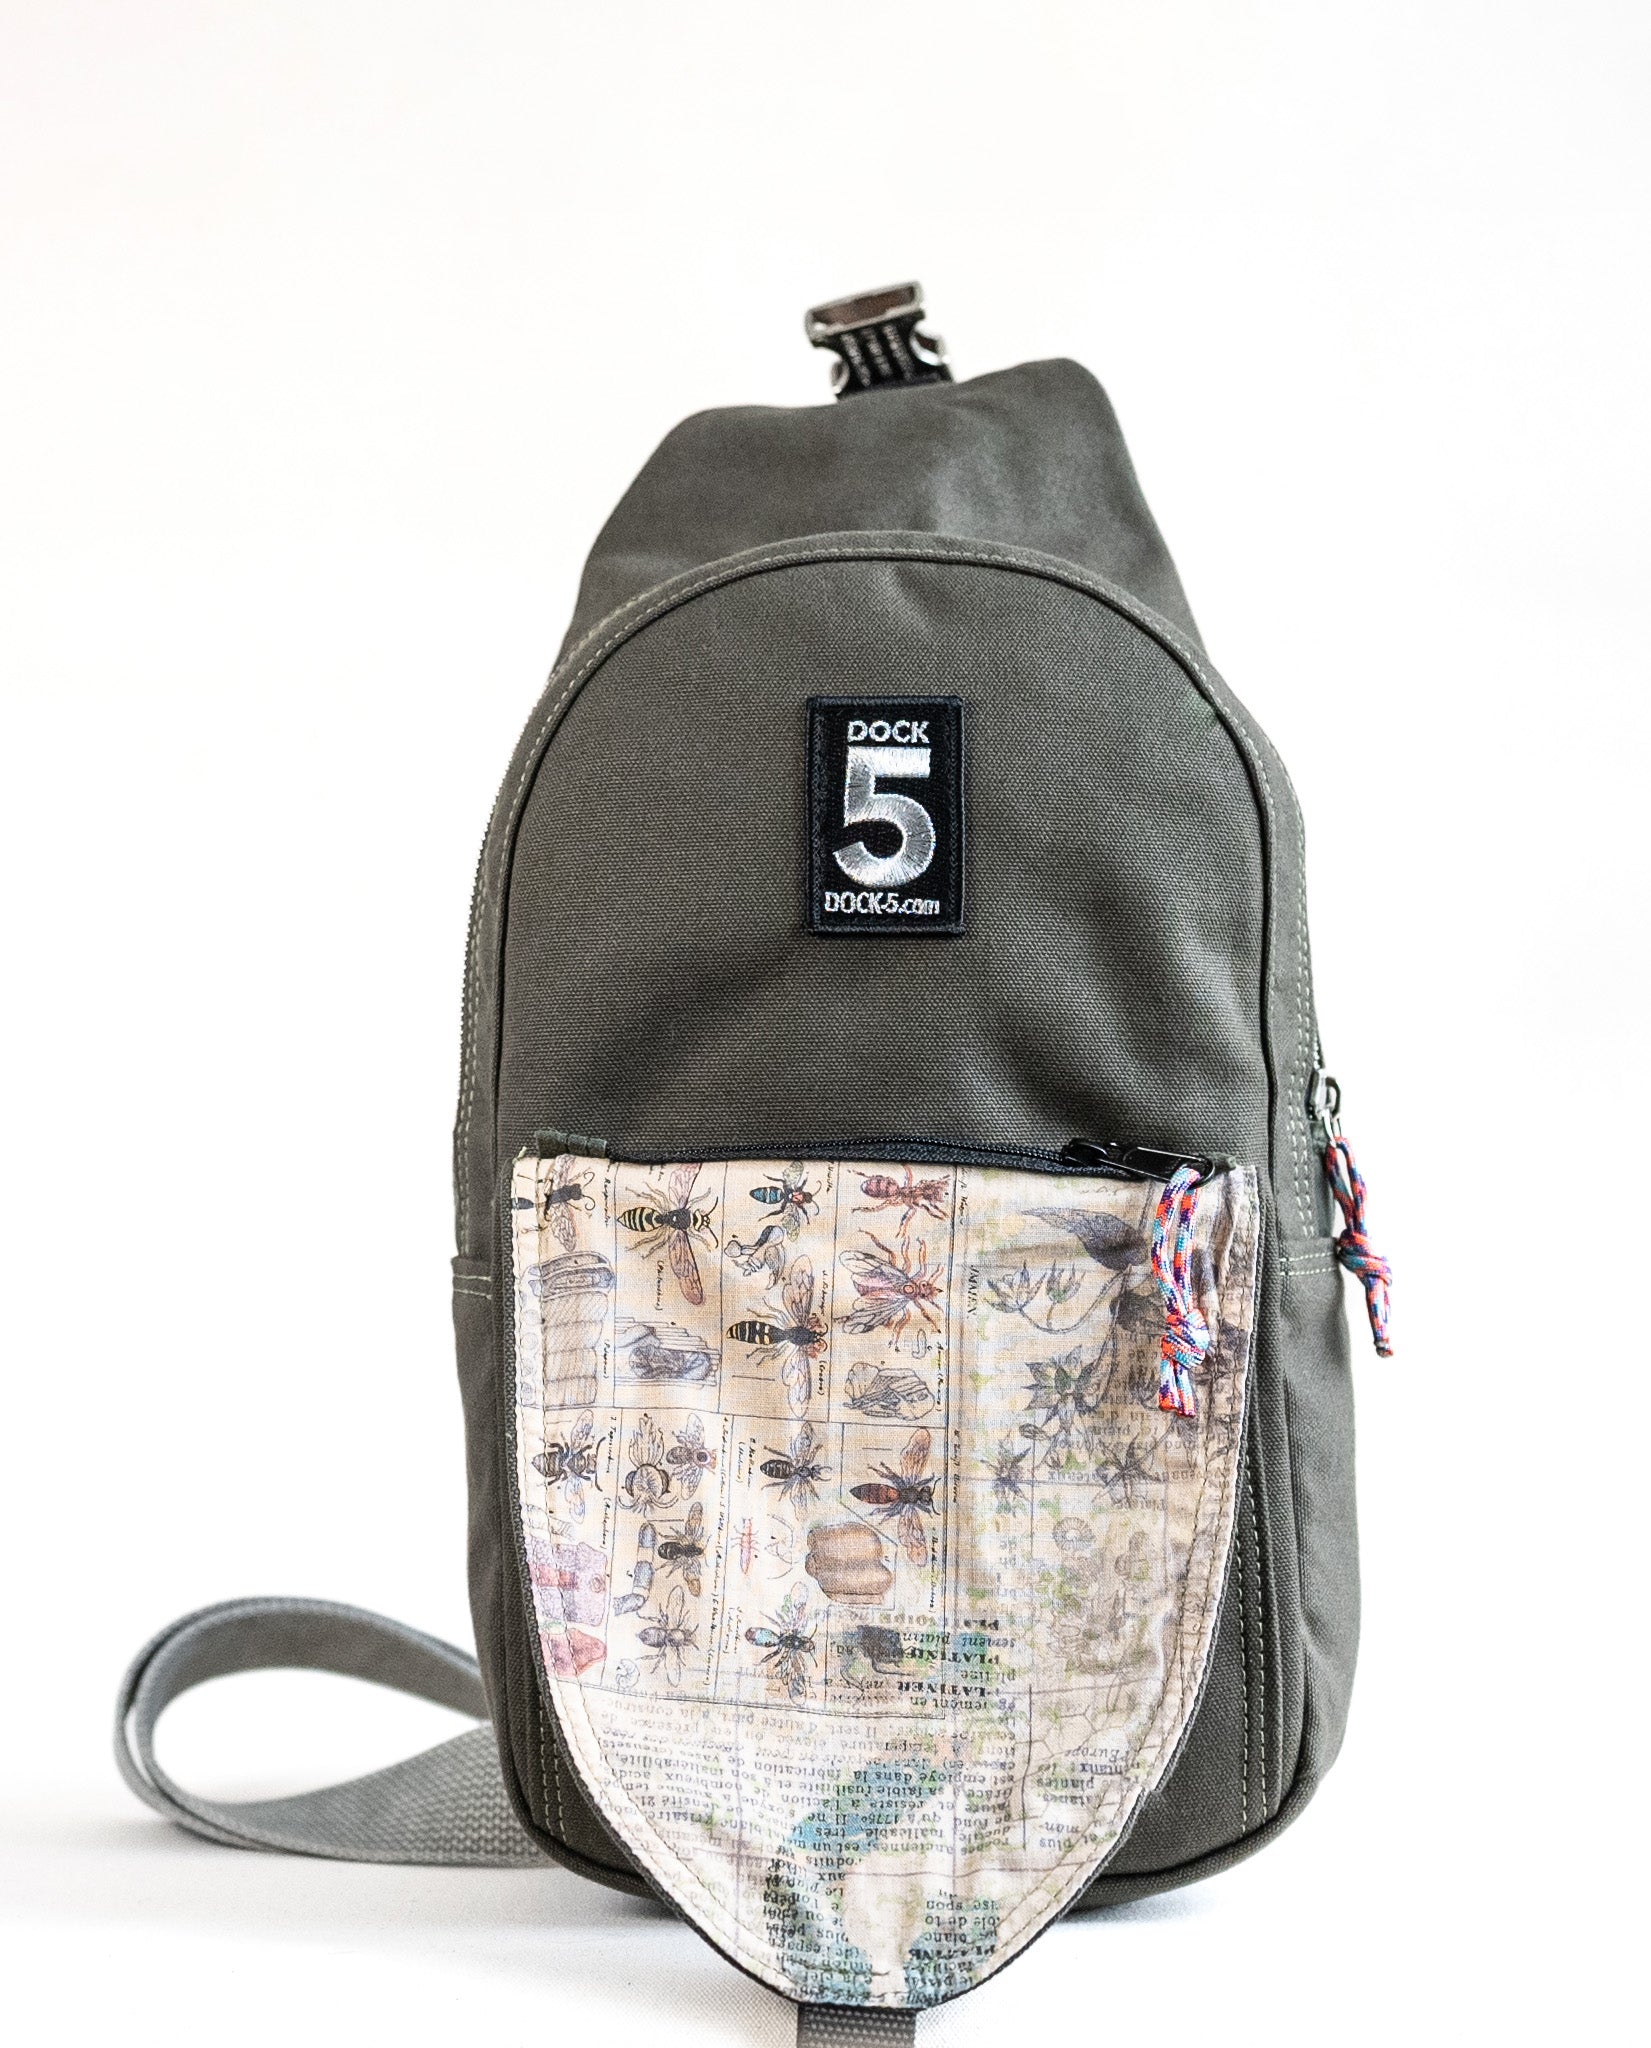 Dock 5’s hand-sewn Dragonfly  Canvas Sling Bag is lined with a entomology print fabric